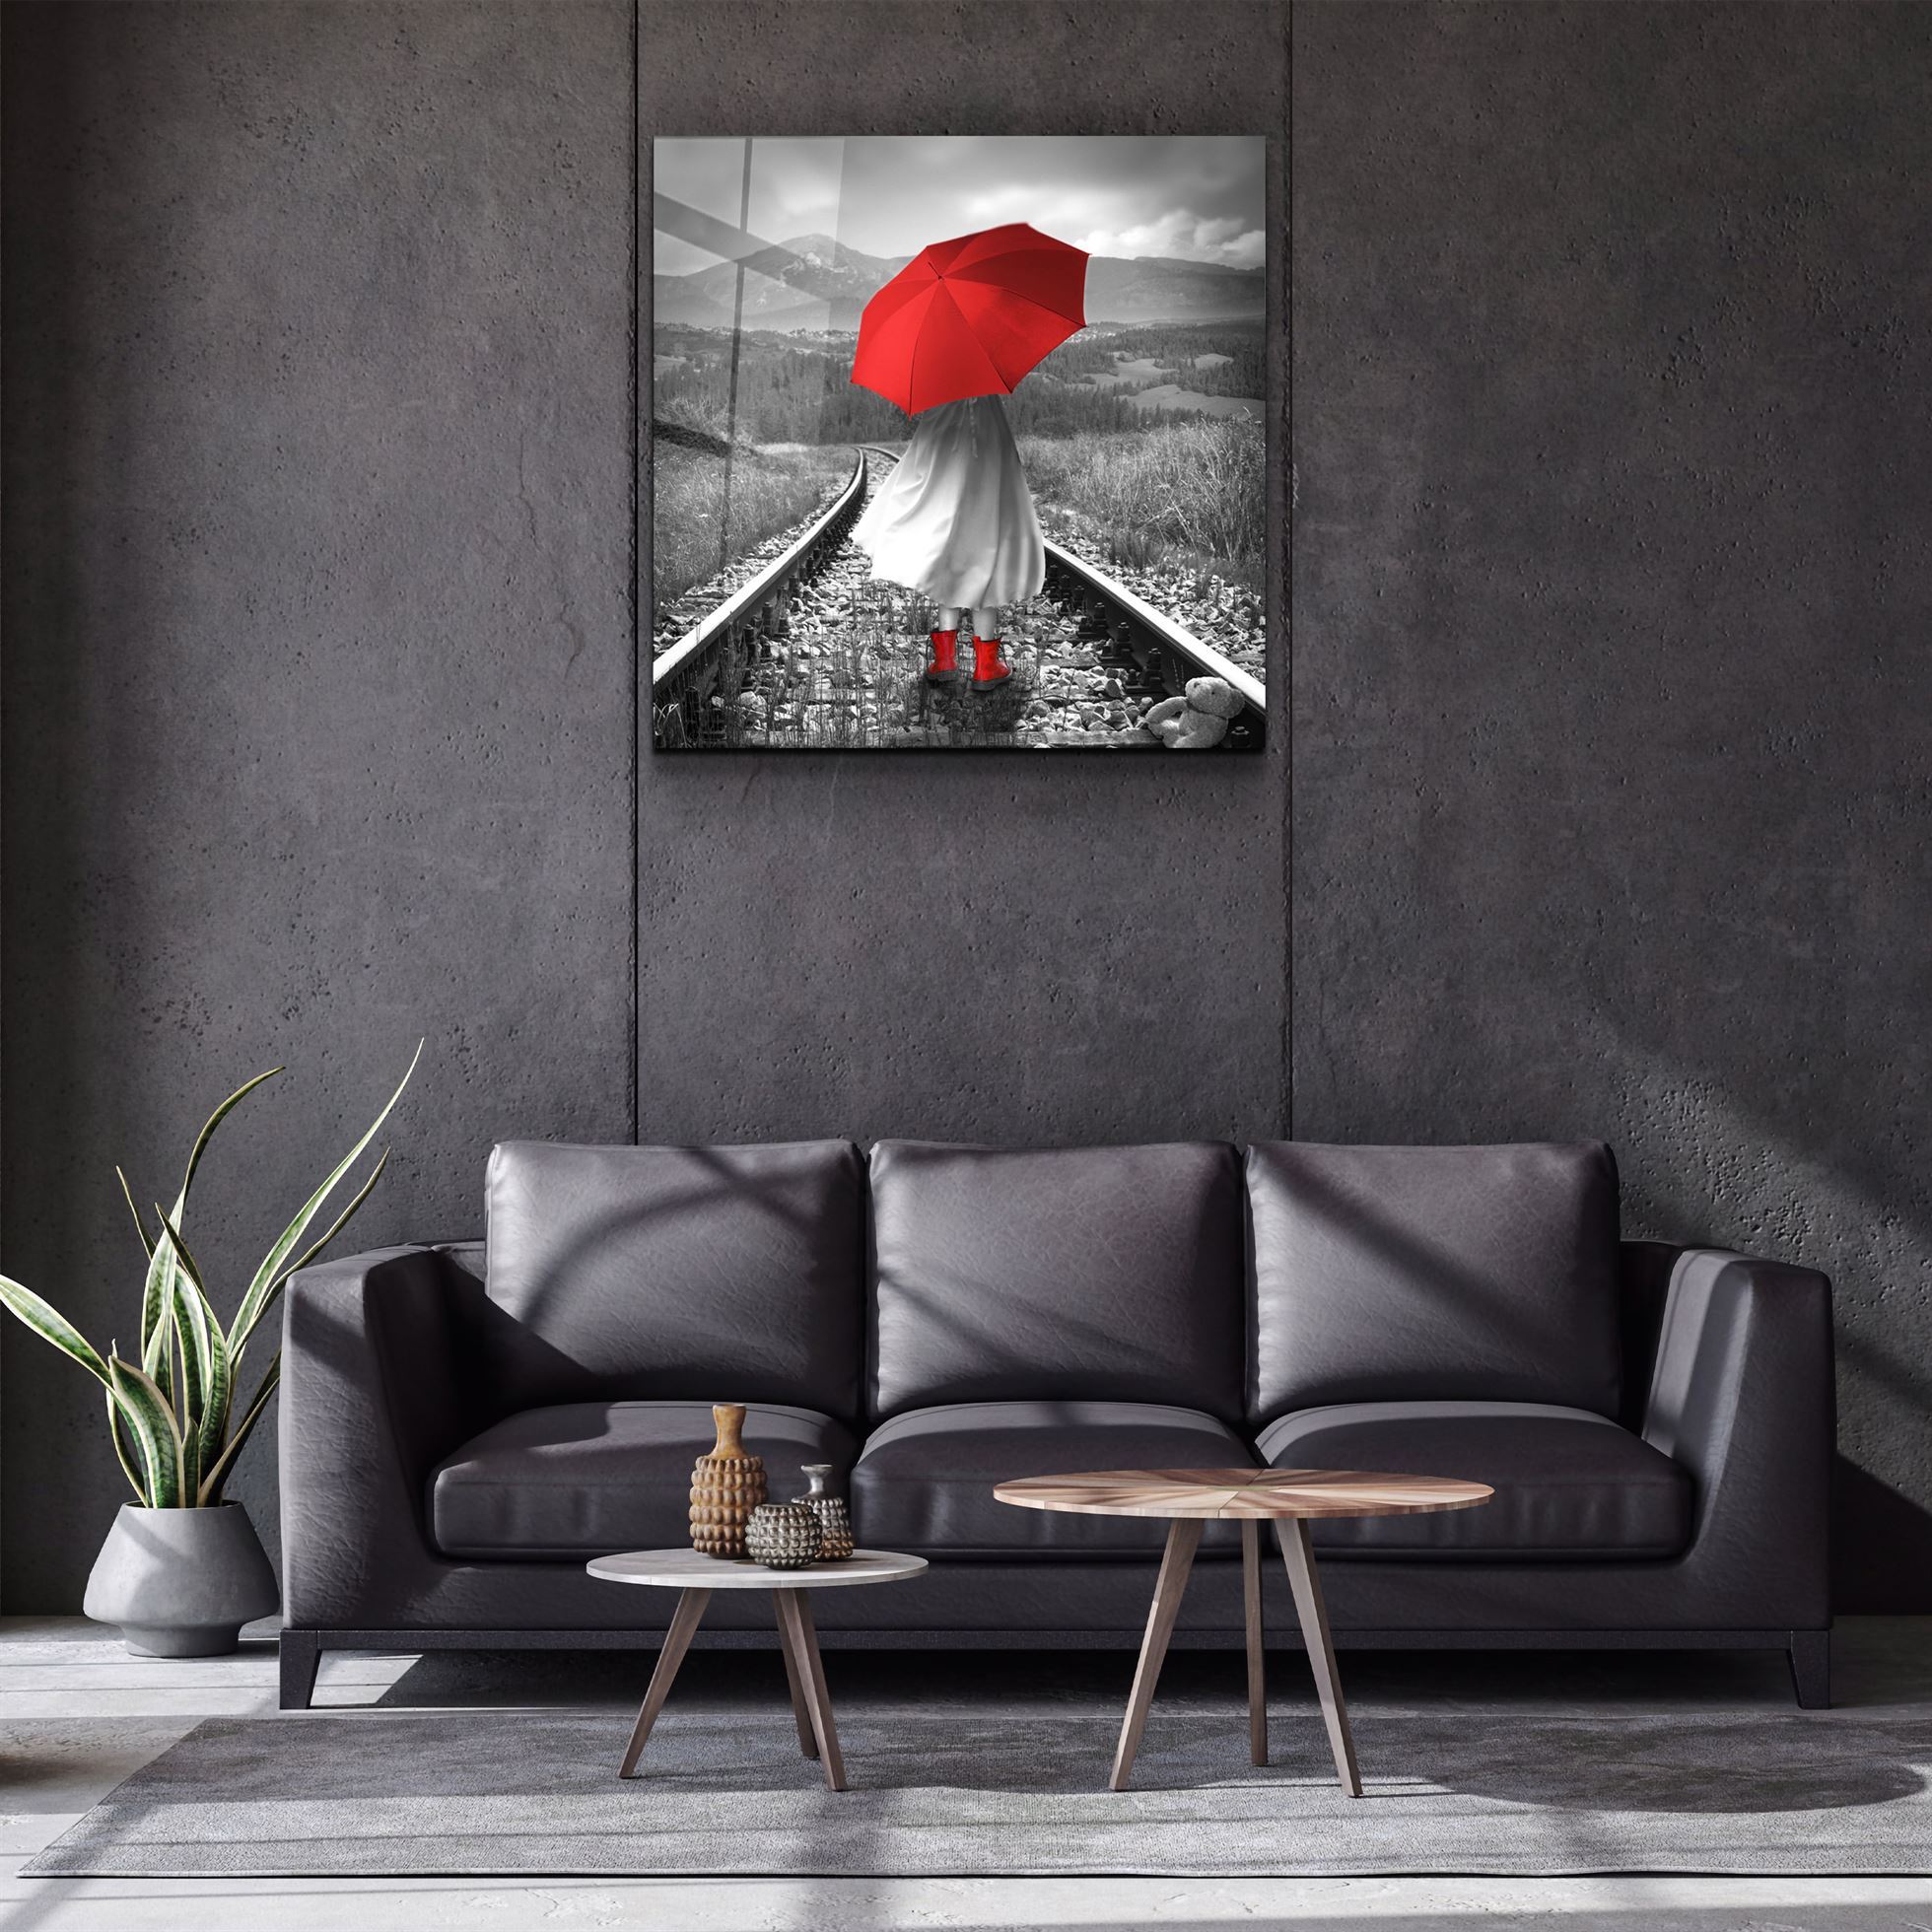 ・"Girl with Red Umbrella"・Glass Wall Art